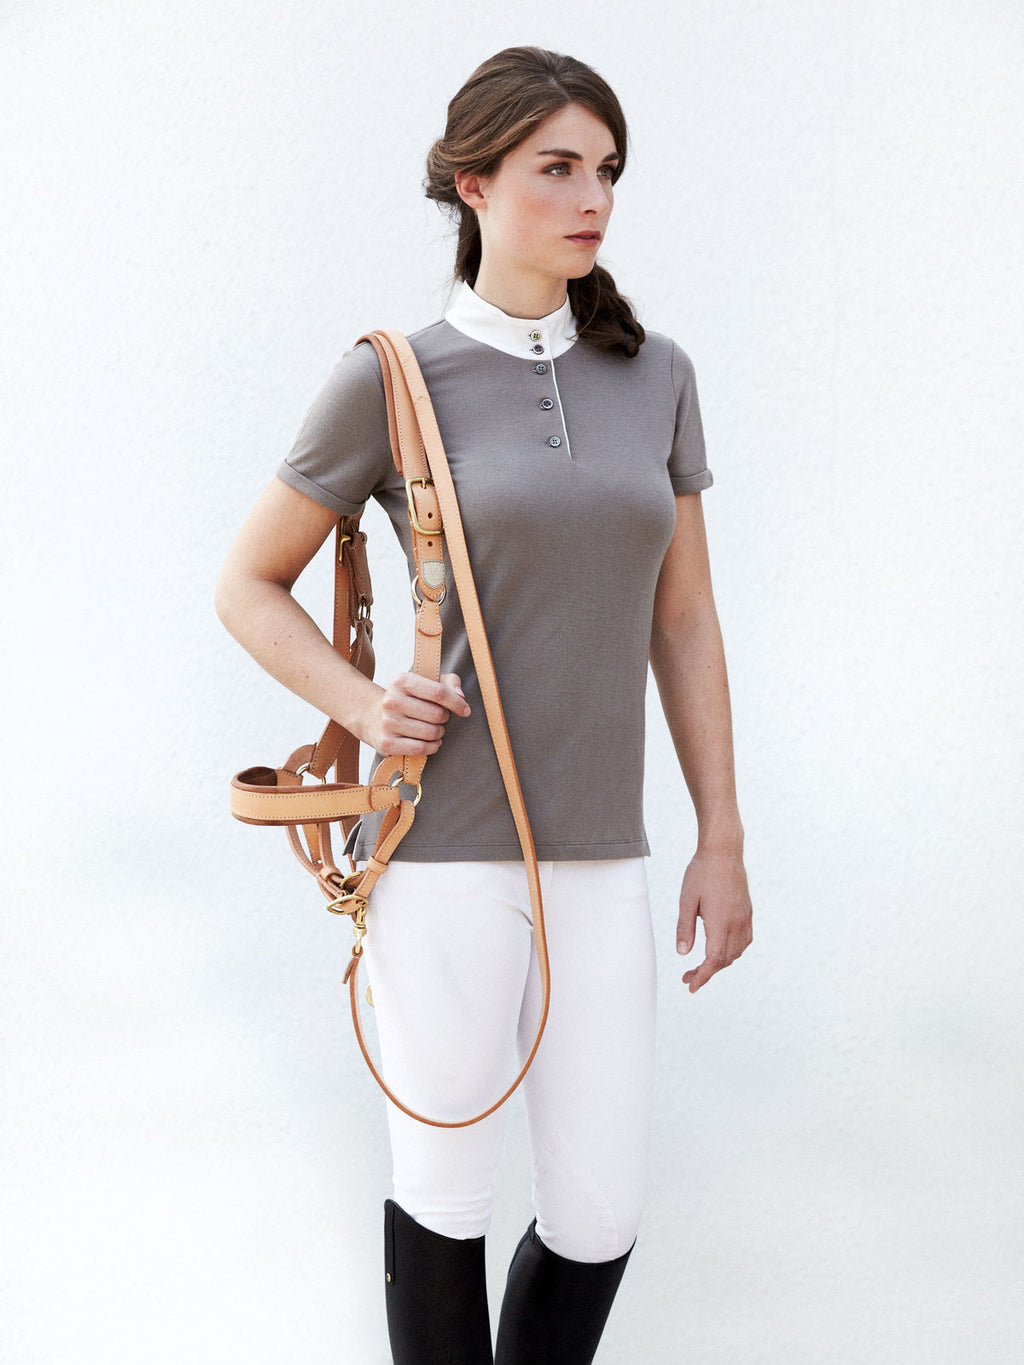 VALOR horse halter in naturally tanned leather LANA